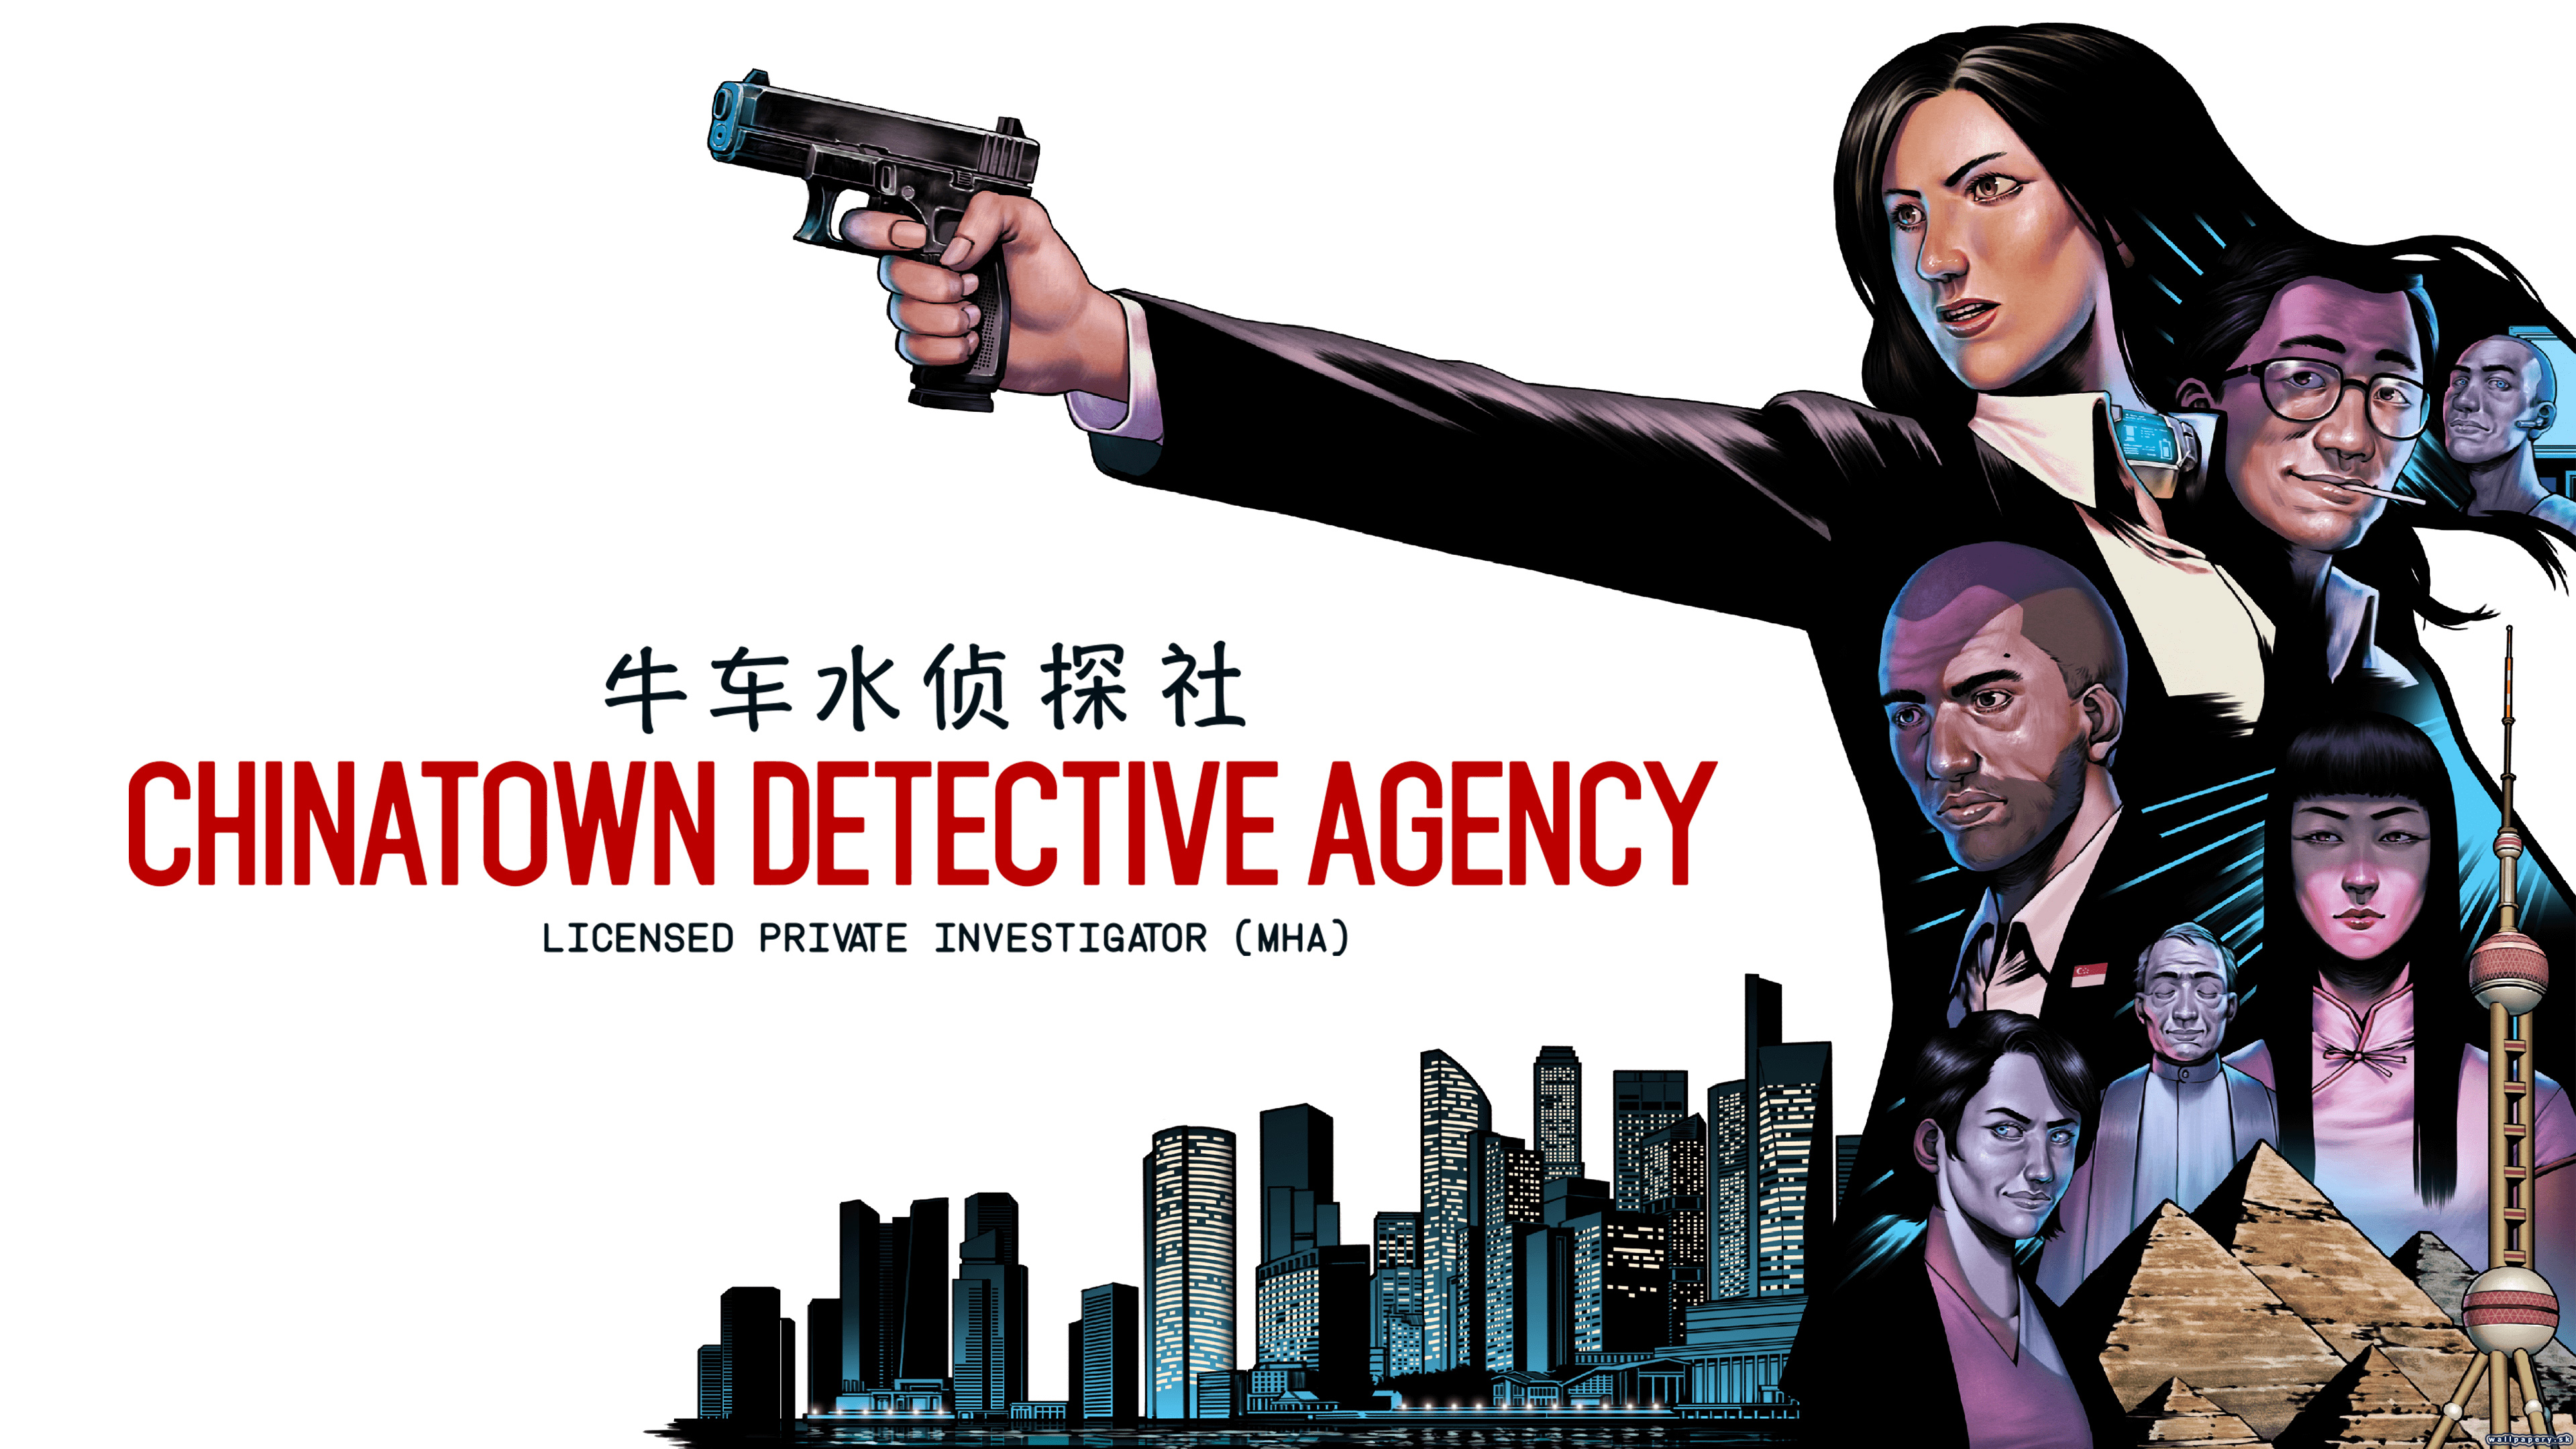 Chinatown Detective Agency - wallpaper 4